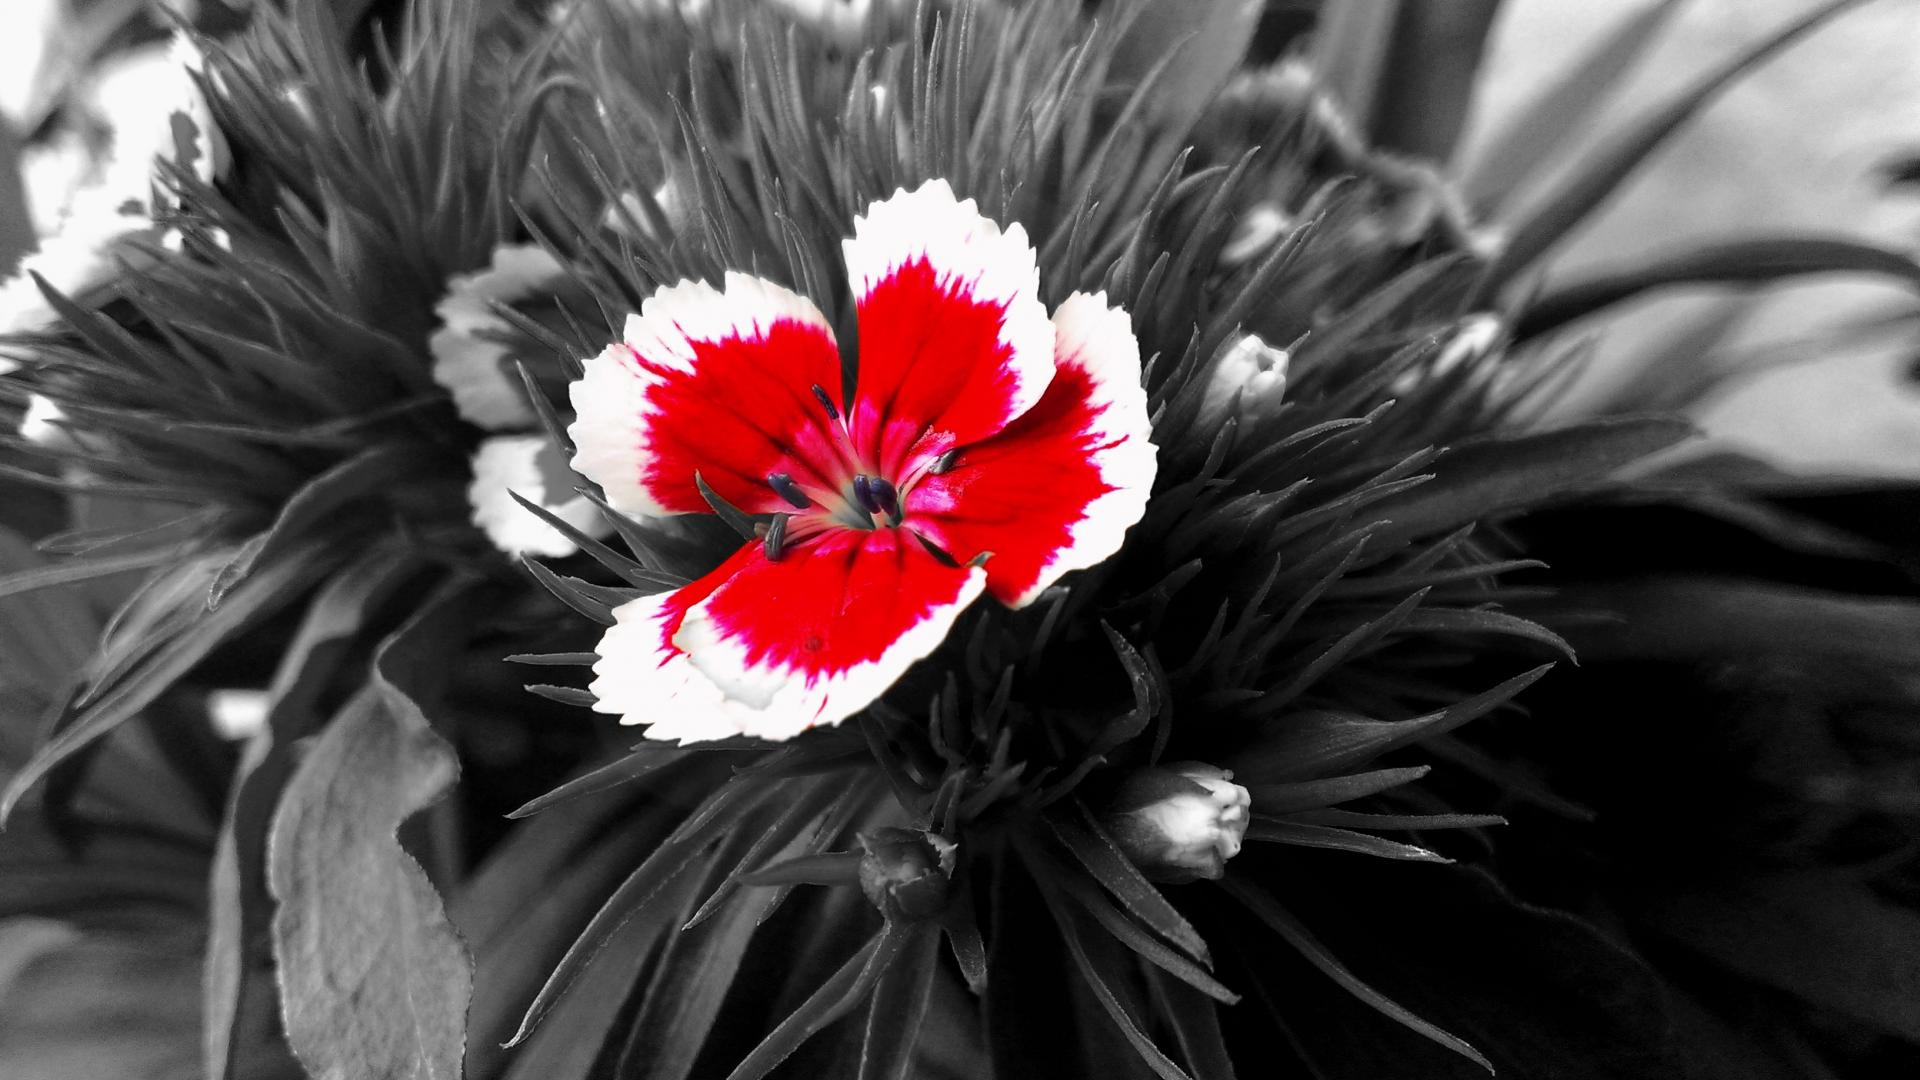 Red And White Flowers Wallpapers - Wallpaper Cave